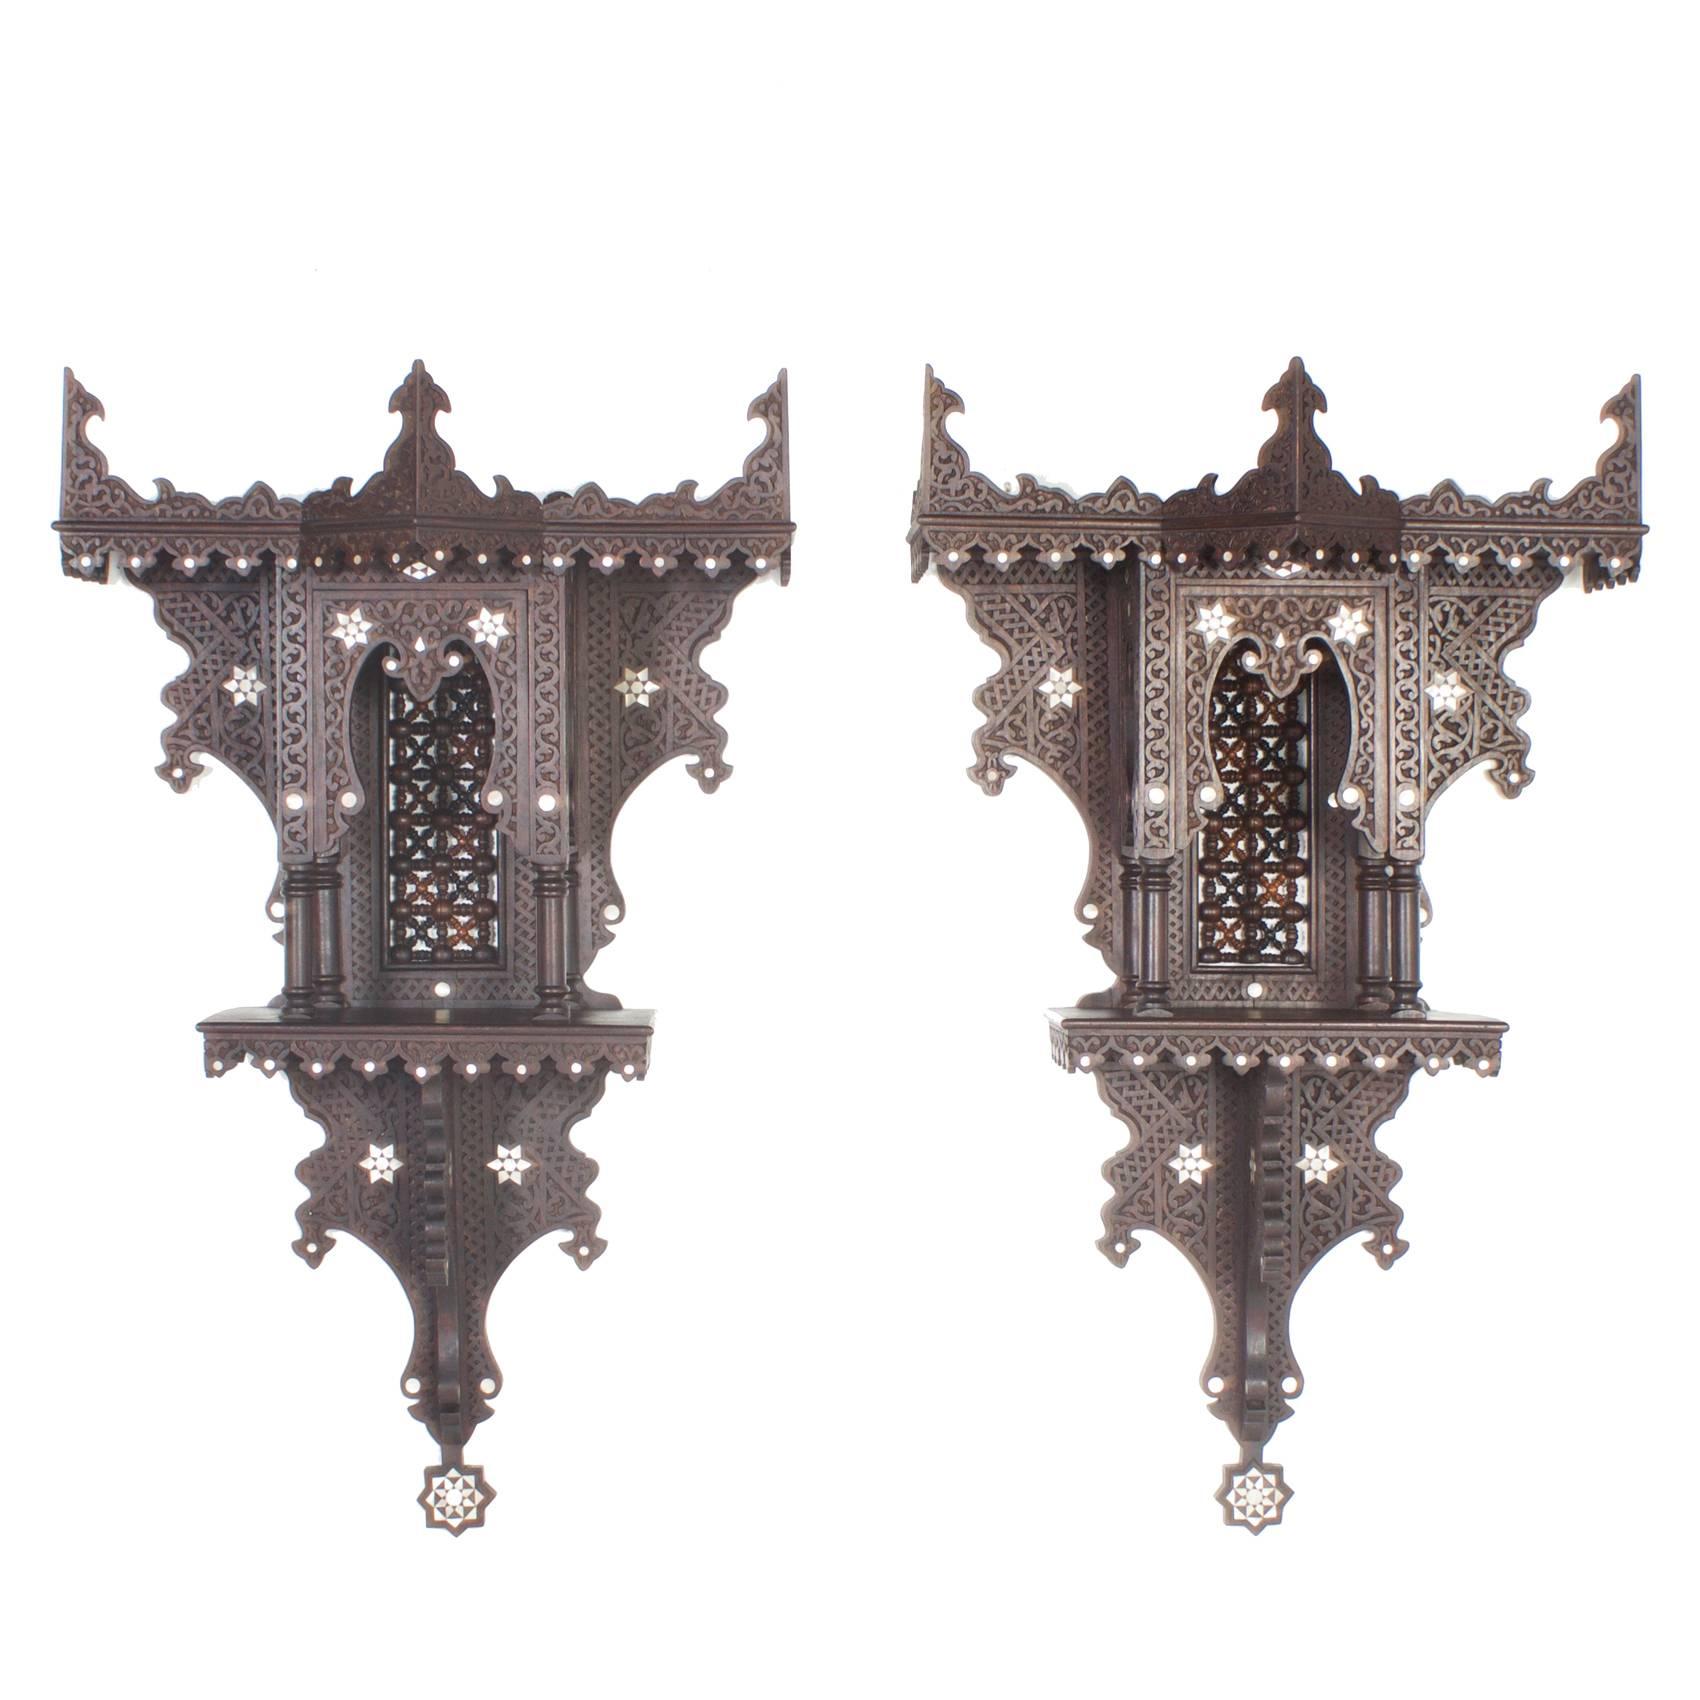 Rare Pair of Moroccan or Syrian Wall Brackets